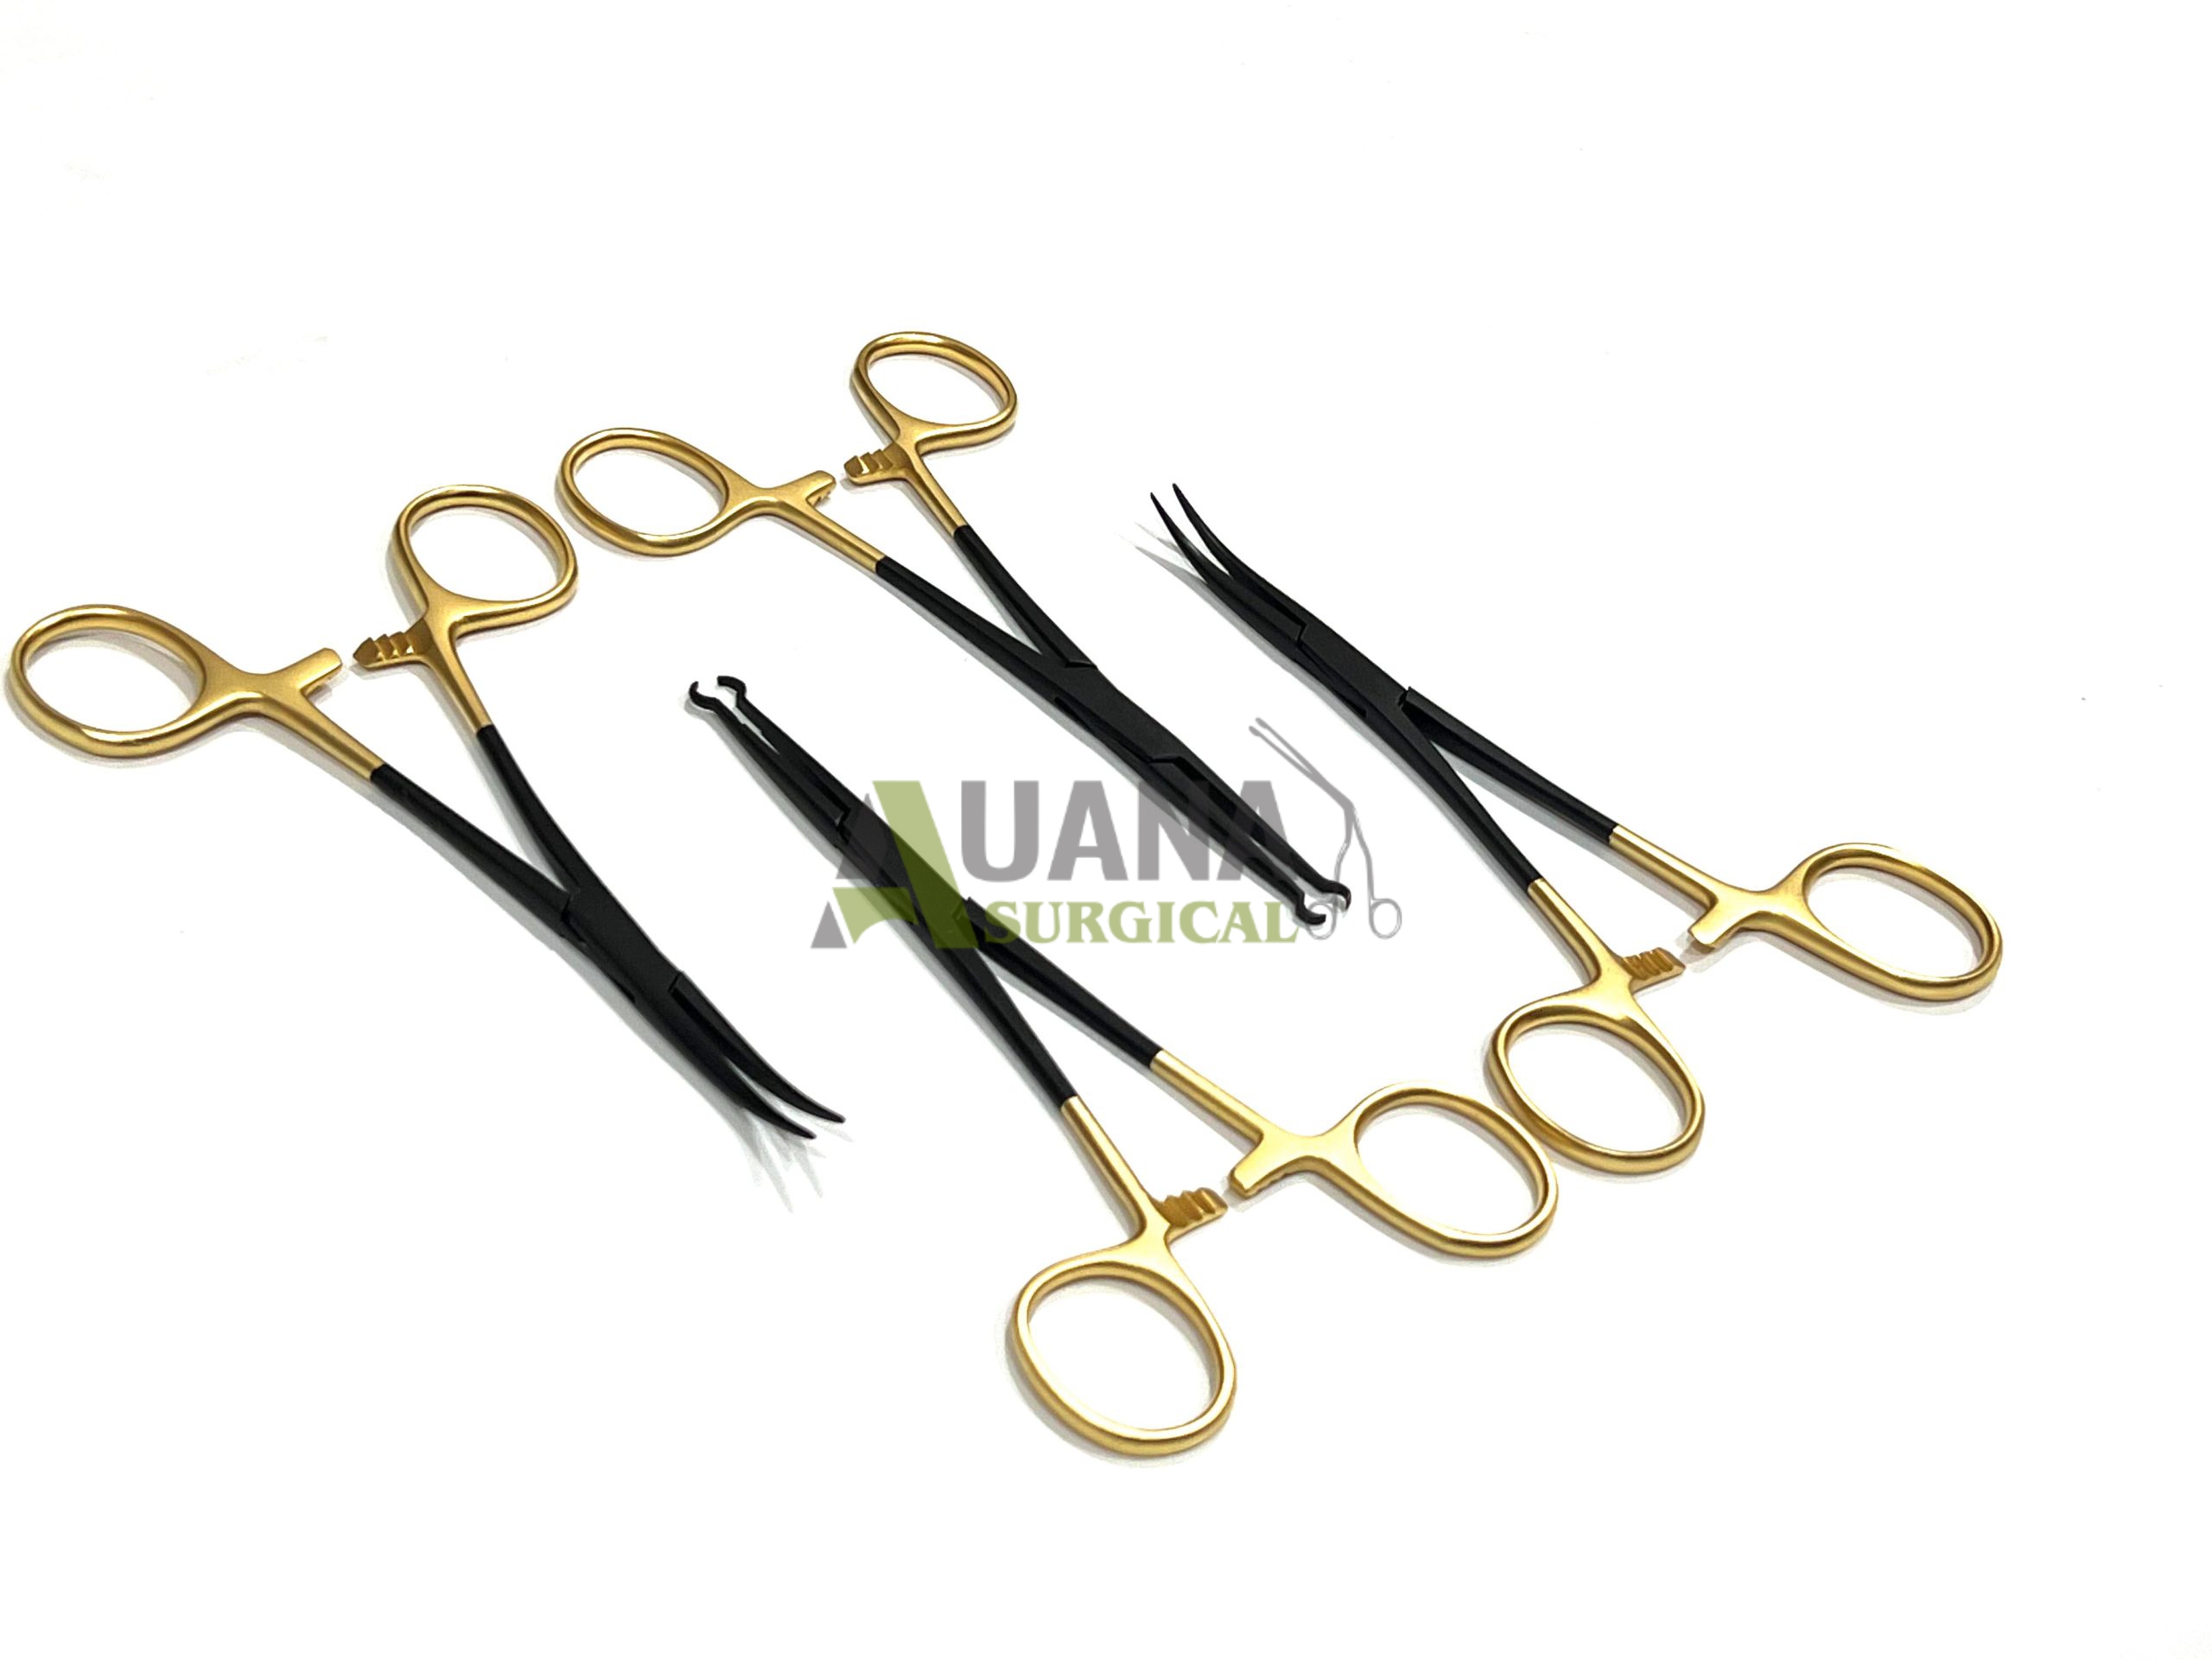 Adson Artery Forceps and Vasectomy Ring Forceps